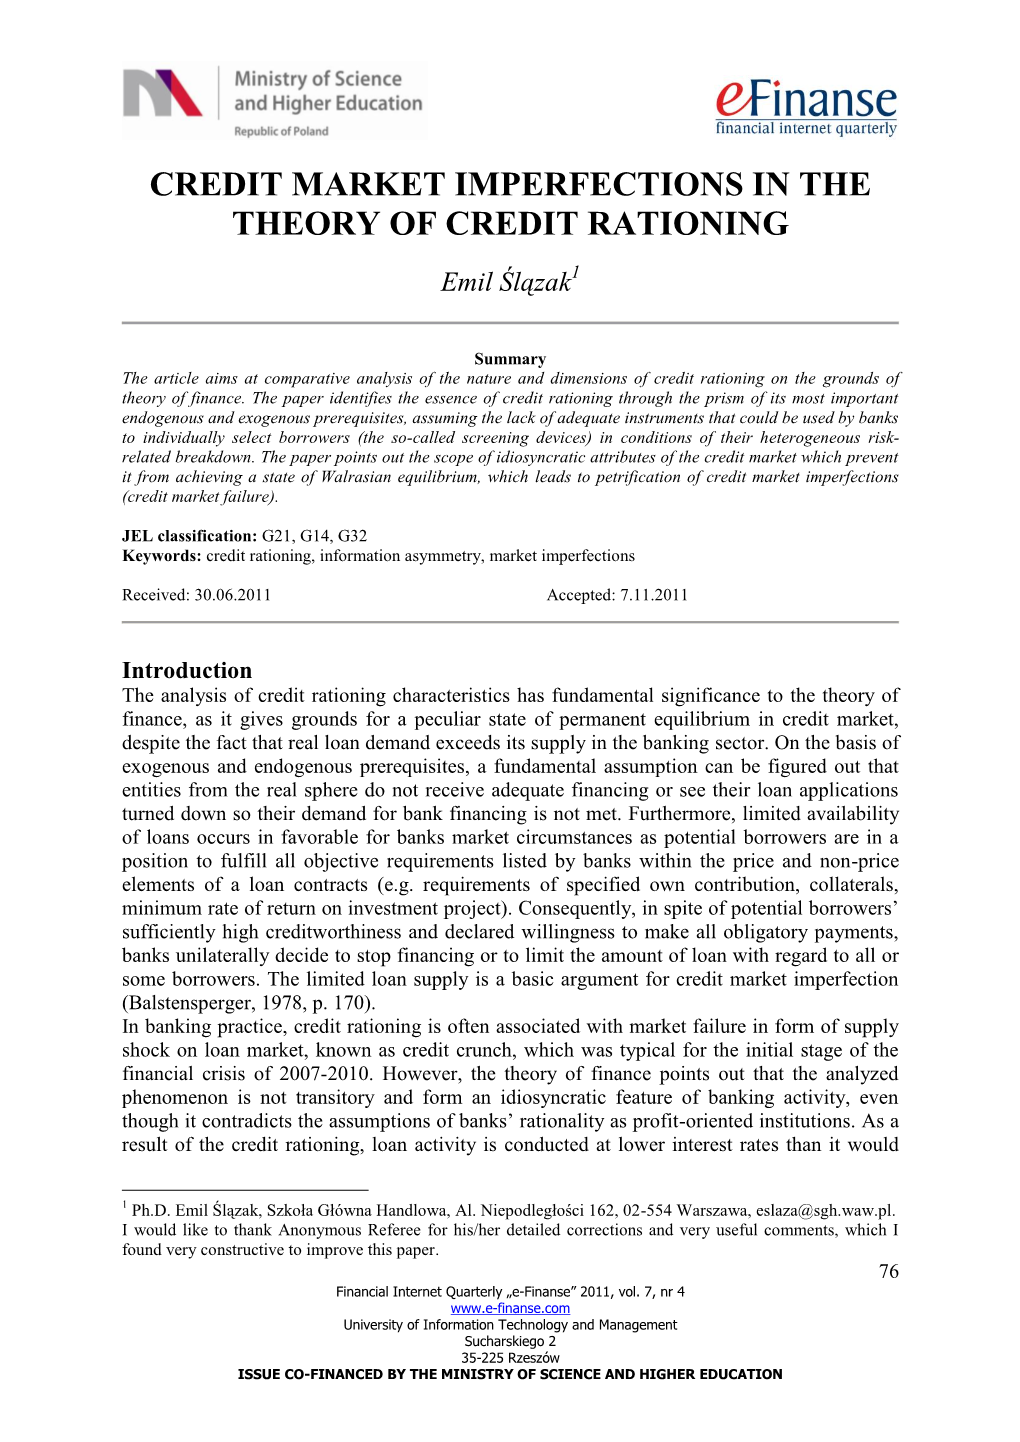 Credit Market Imperfections in the Theory of Credit Rationing